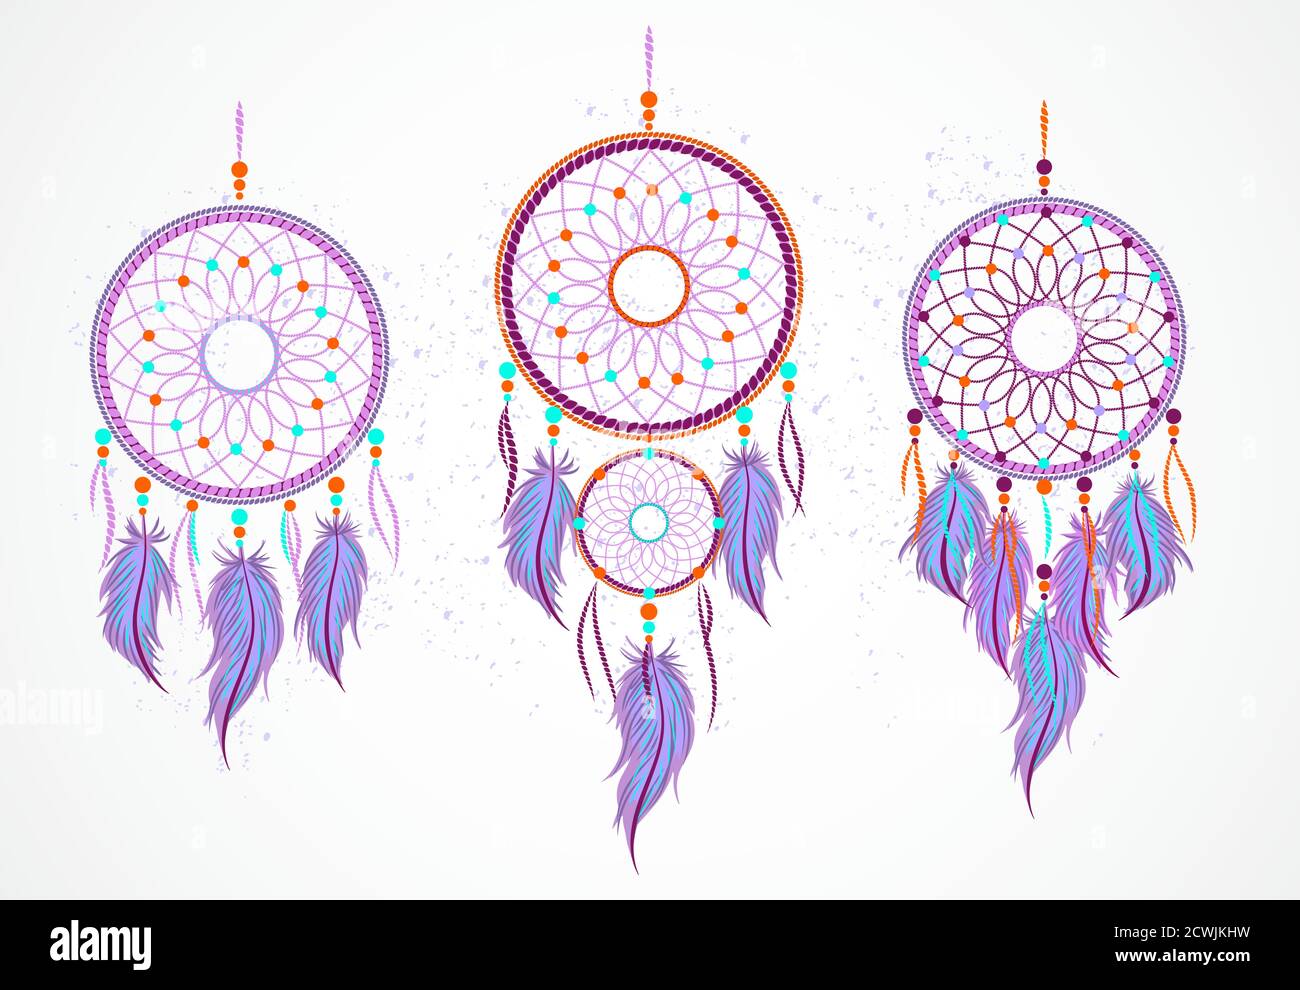 https://c8.alamy.com/comp/2CWJKHW/vector-set-of-decorative-dreamcatchers-with-feathers-on-a-grunge-background-magic-symbol-in-violet-orange-and-turquoise-color-for-t-shirts-and-oth-2CWJKHW.jpg